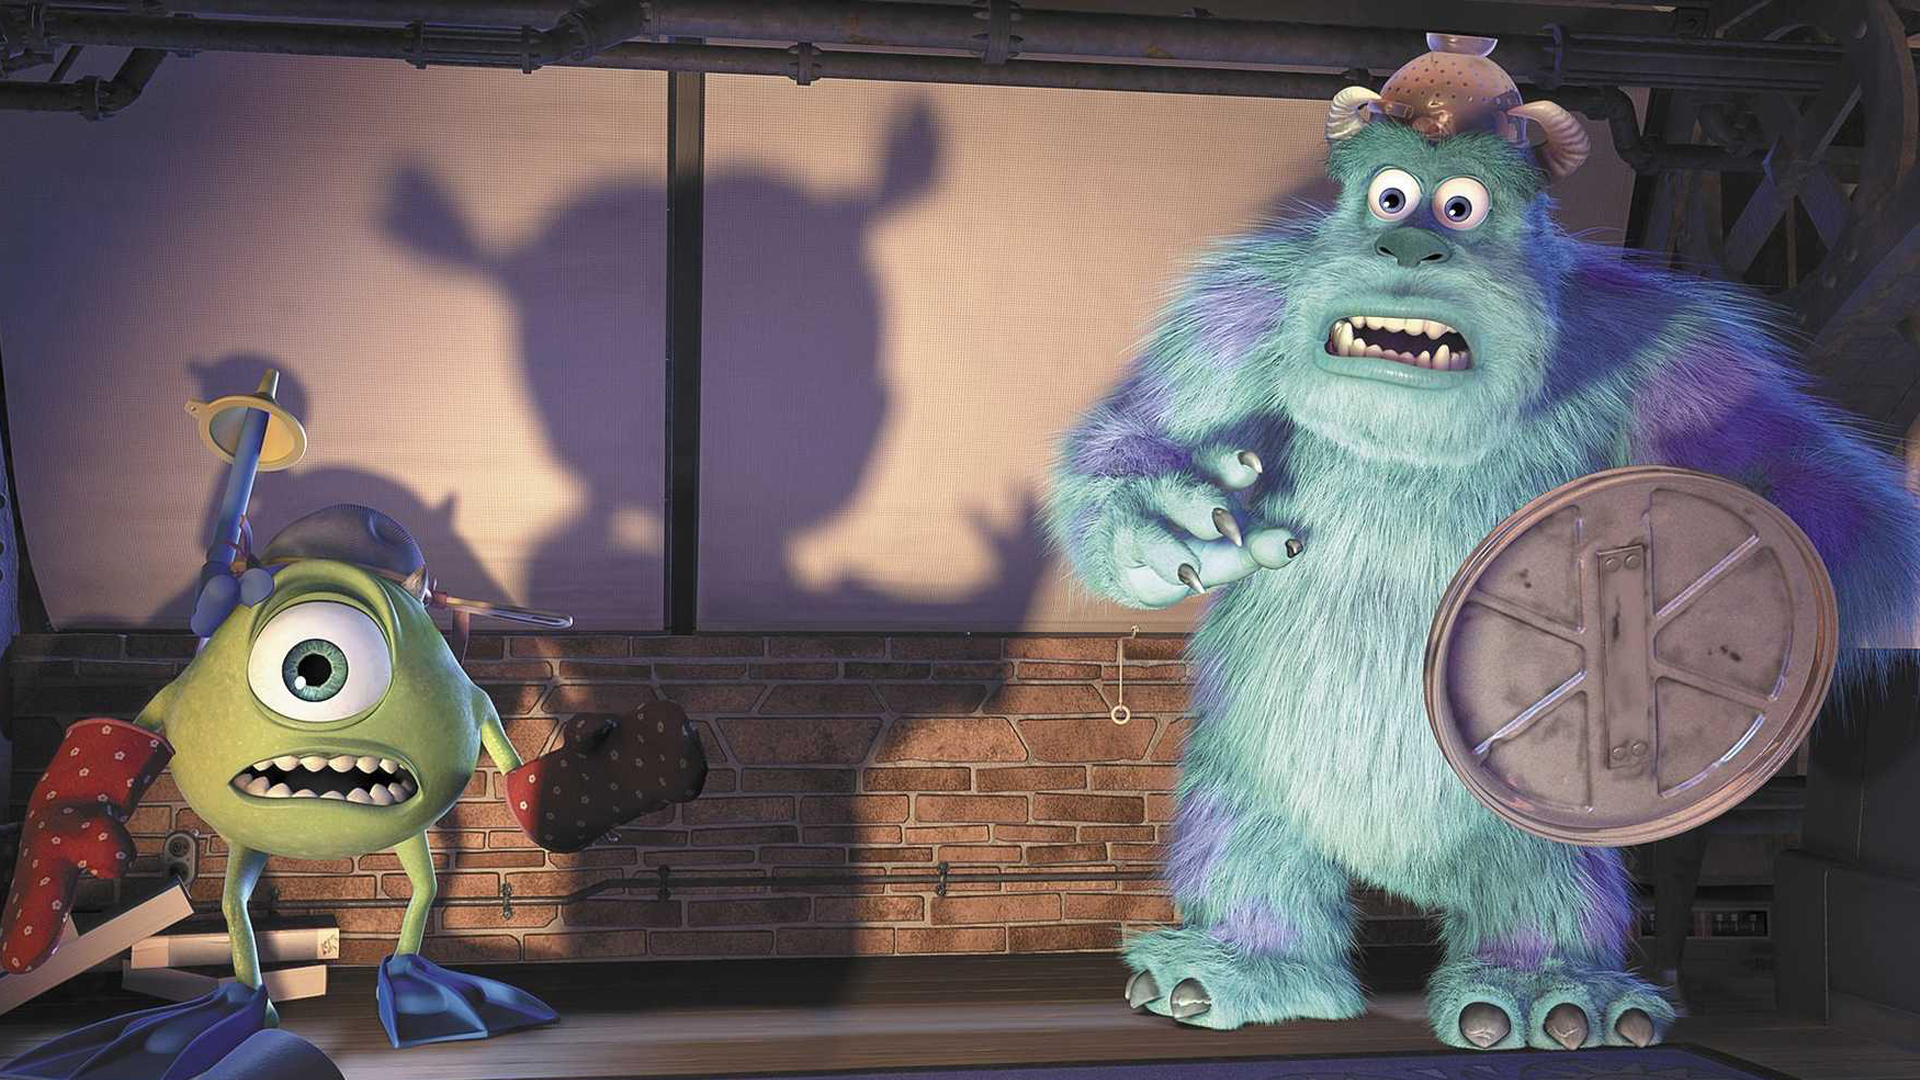 A scene from Monsters Inc